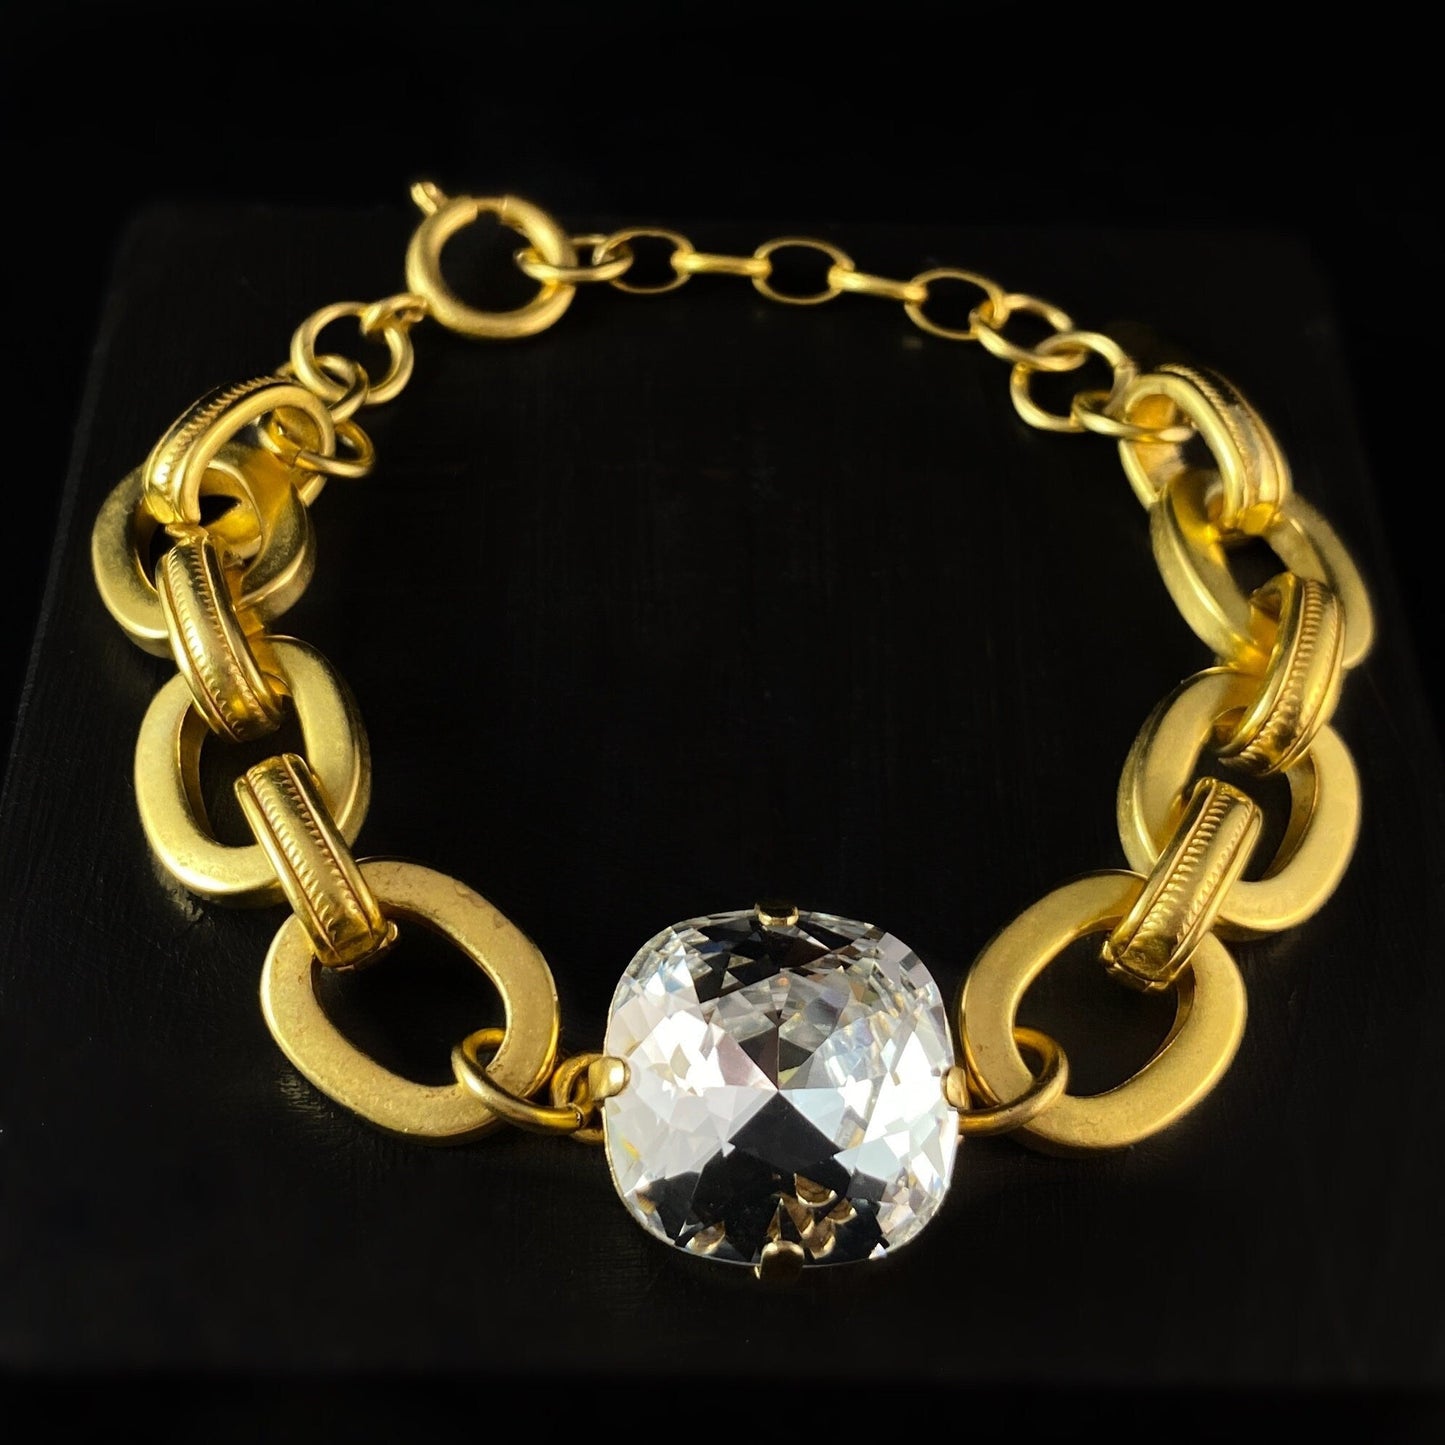 Chunky Gold Chain Bracelet with Large Cushion Cut Clear Swarovski Crystal - La Vie Parisienne by Catherine Popesco